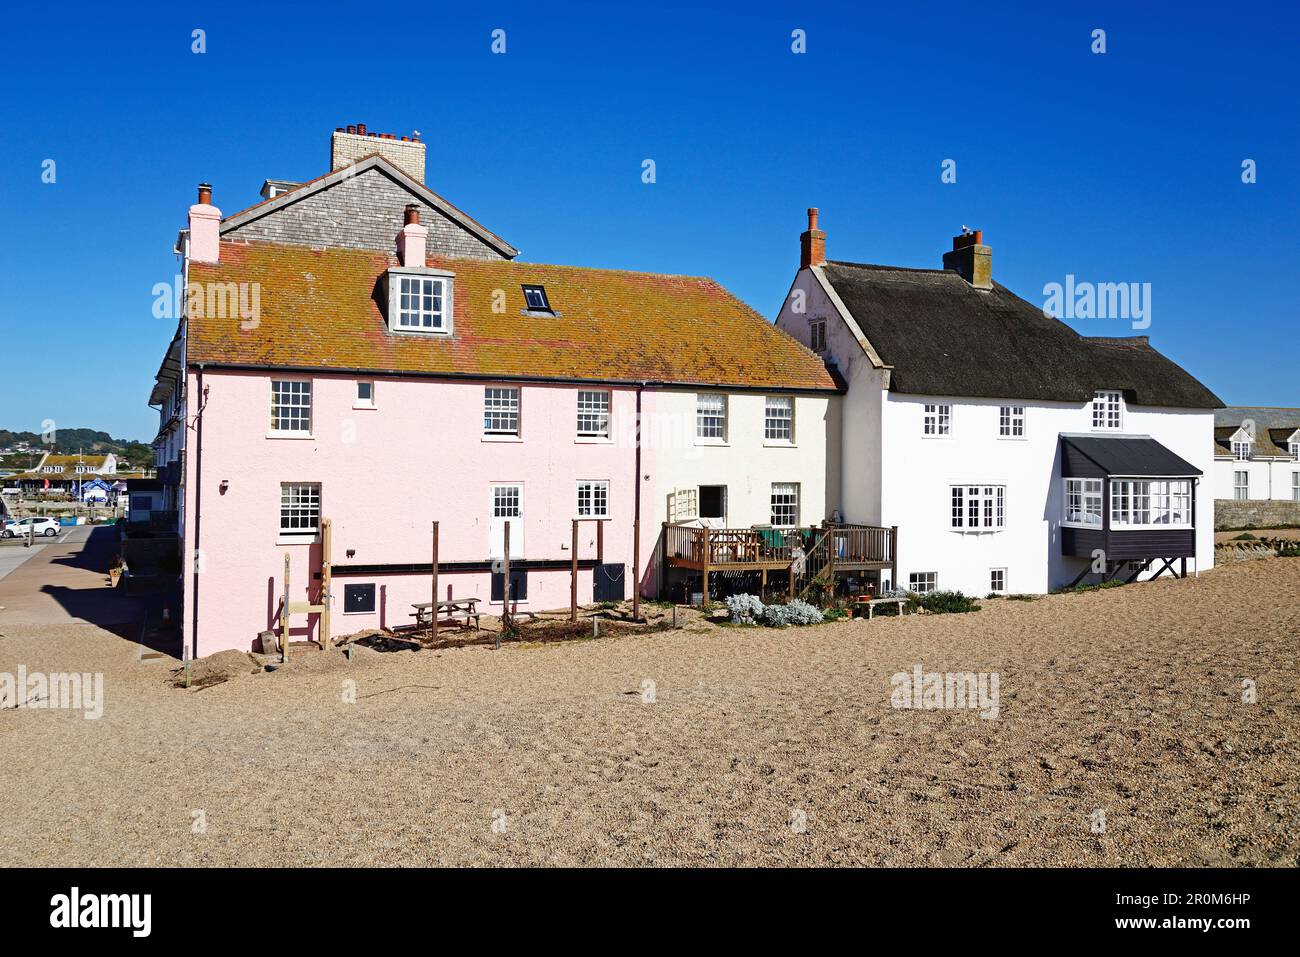 View of pretty painted beachside cottages, West Bay, Dorset, UK, Europe. Stock Photo